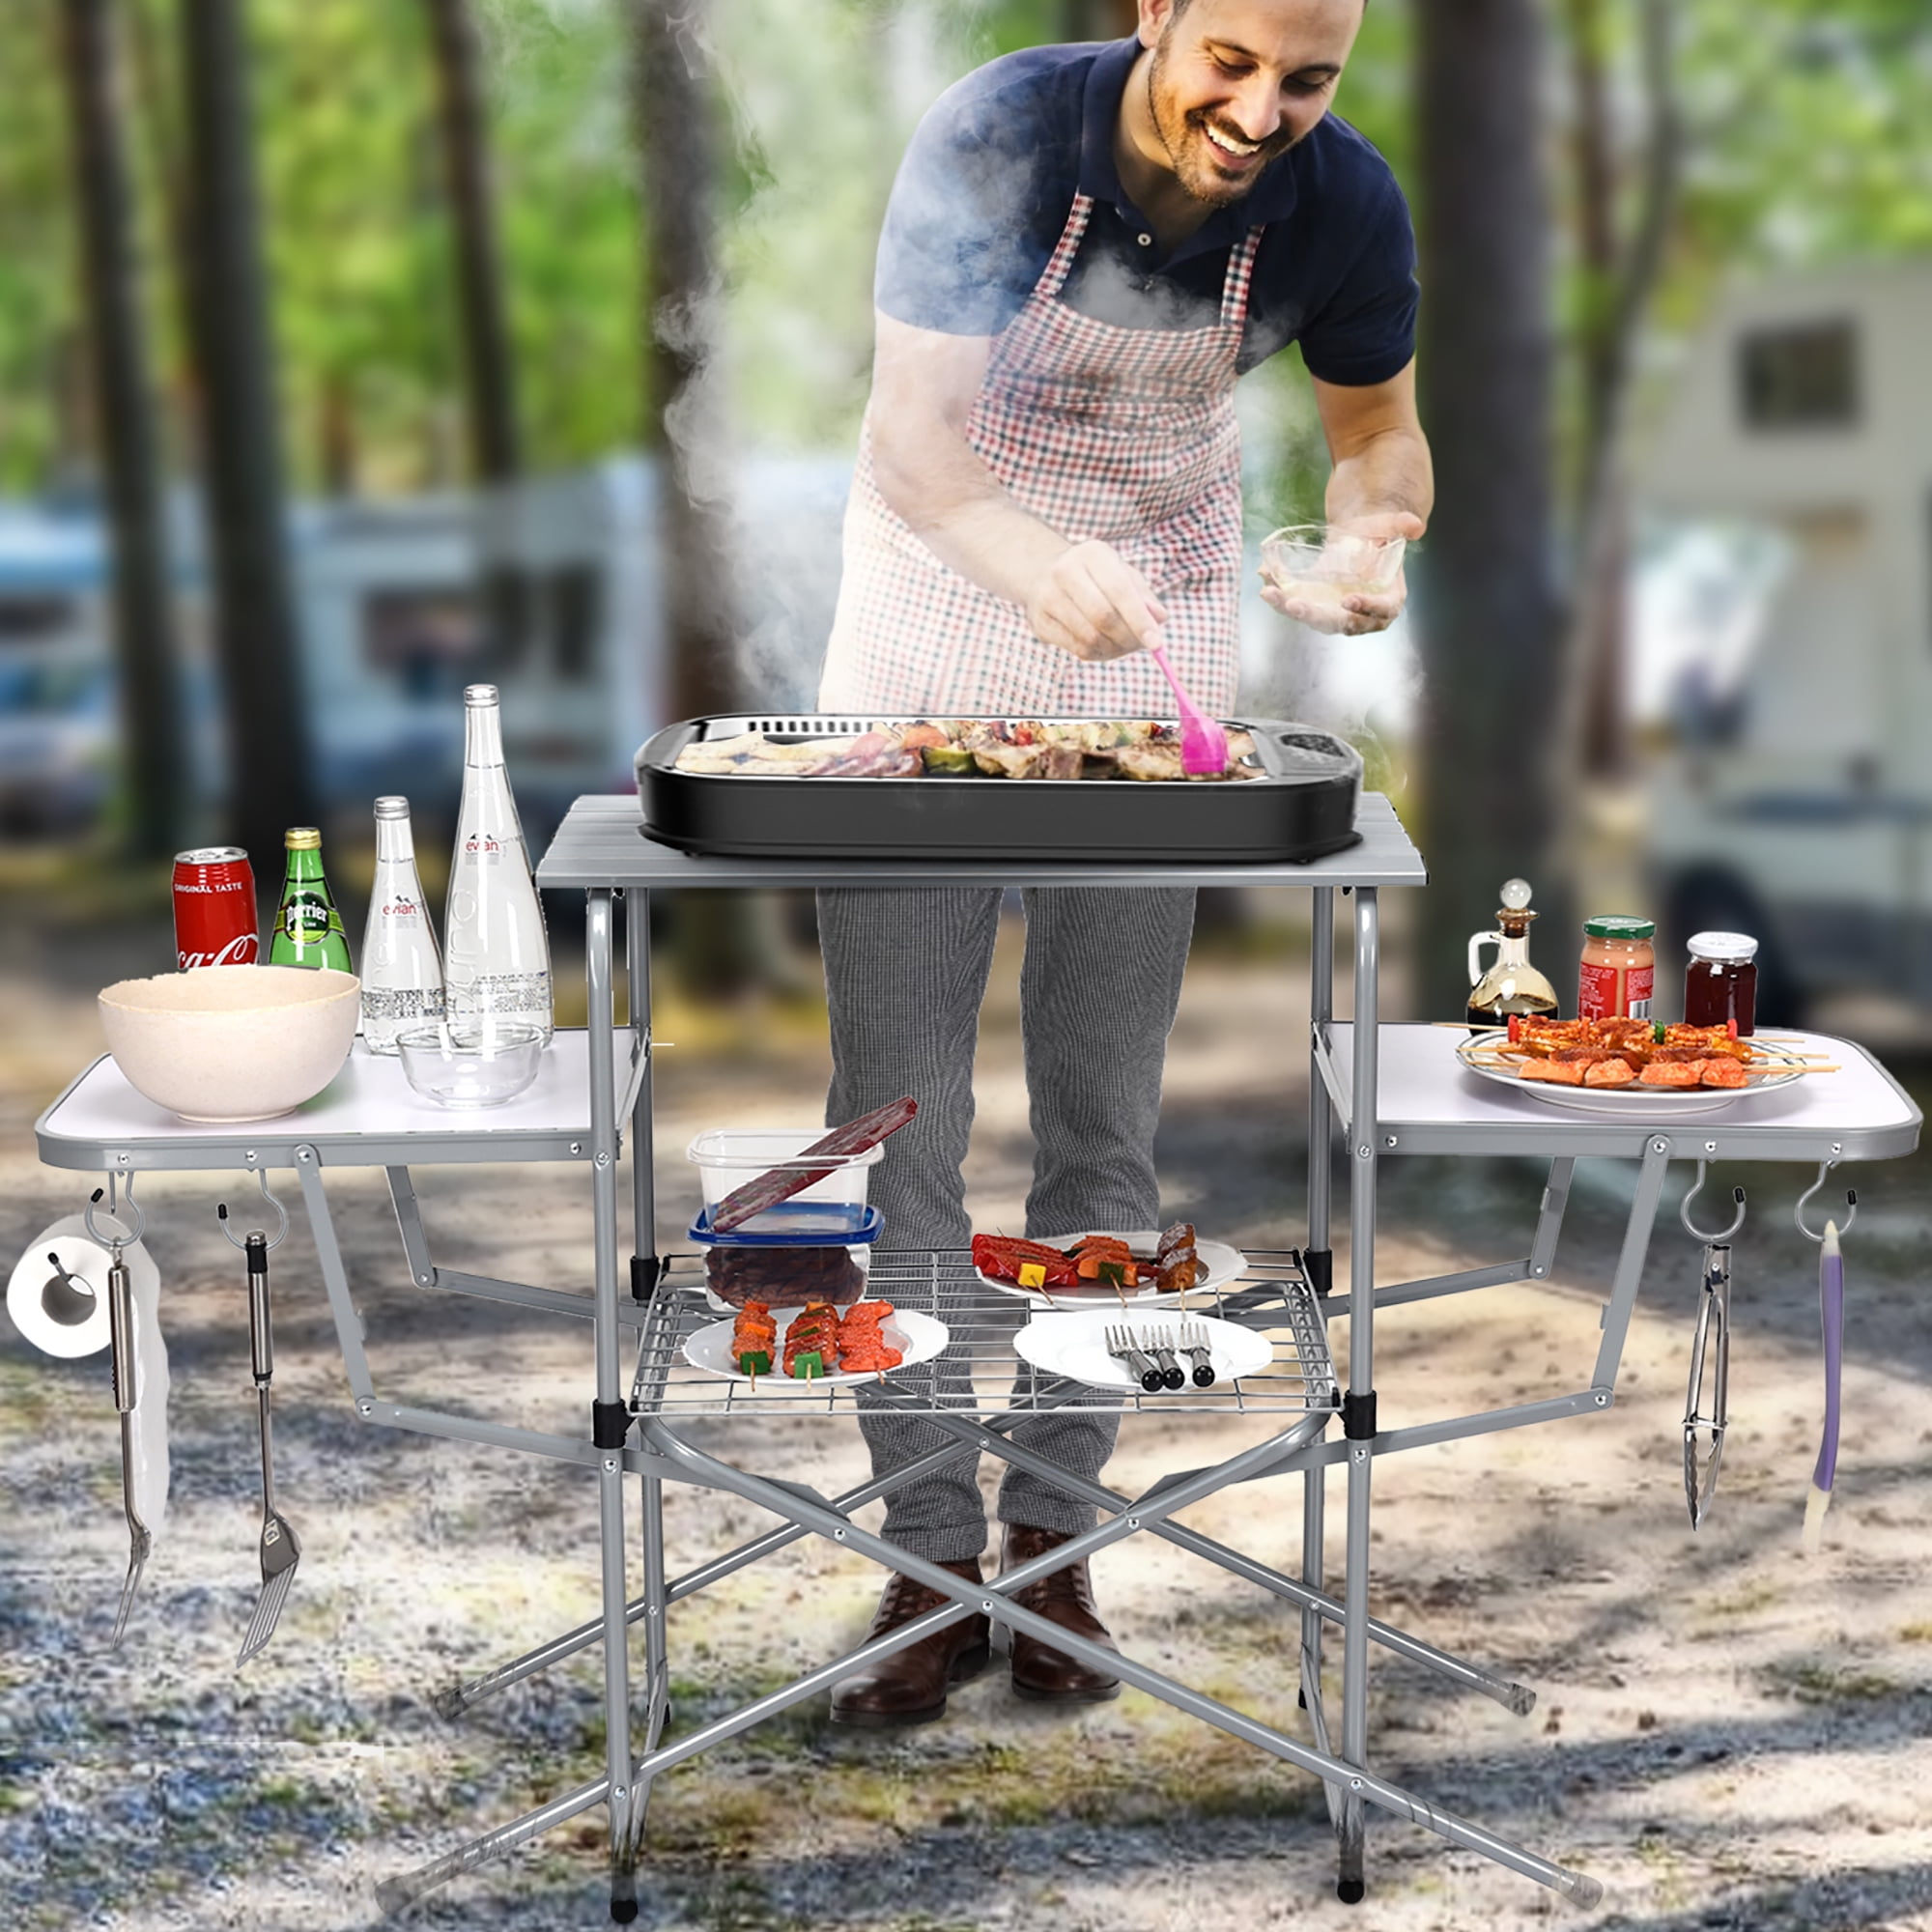 Details about   Portable Grilling Stand Folding BBQ Table Camping Table with Carrying Bag 